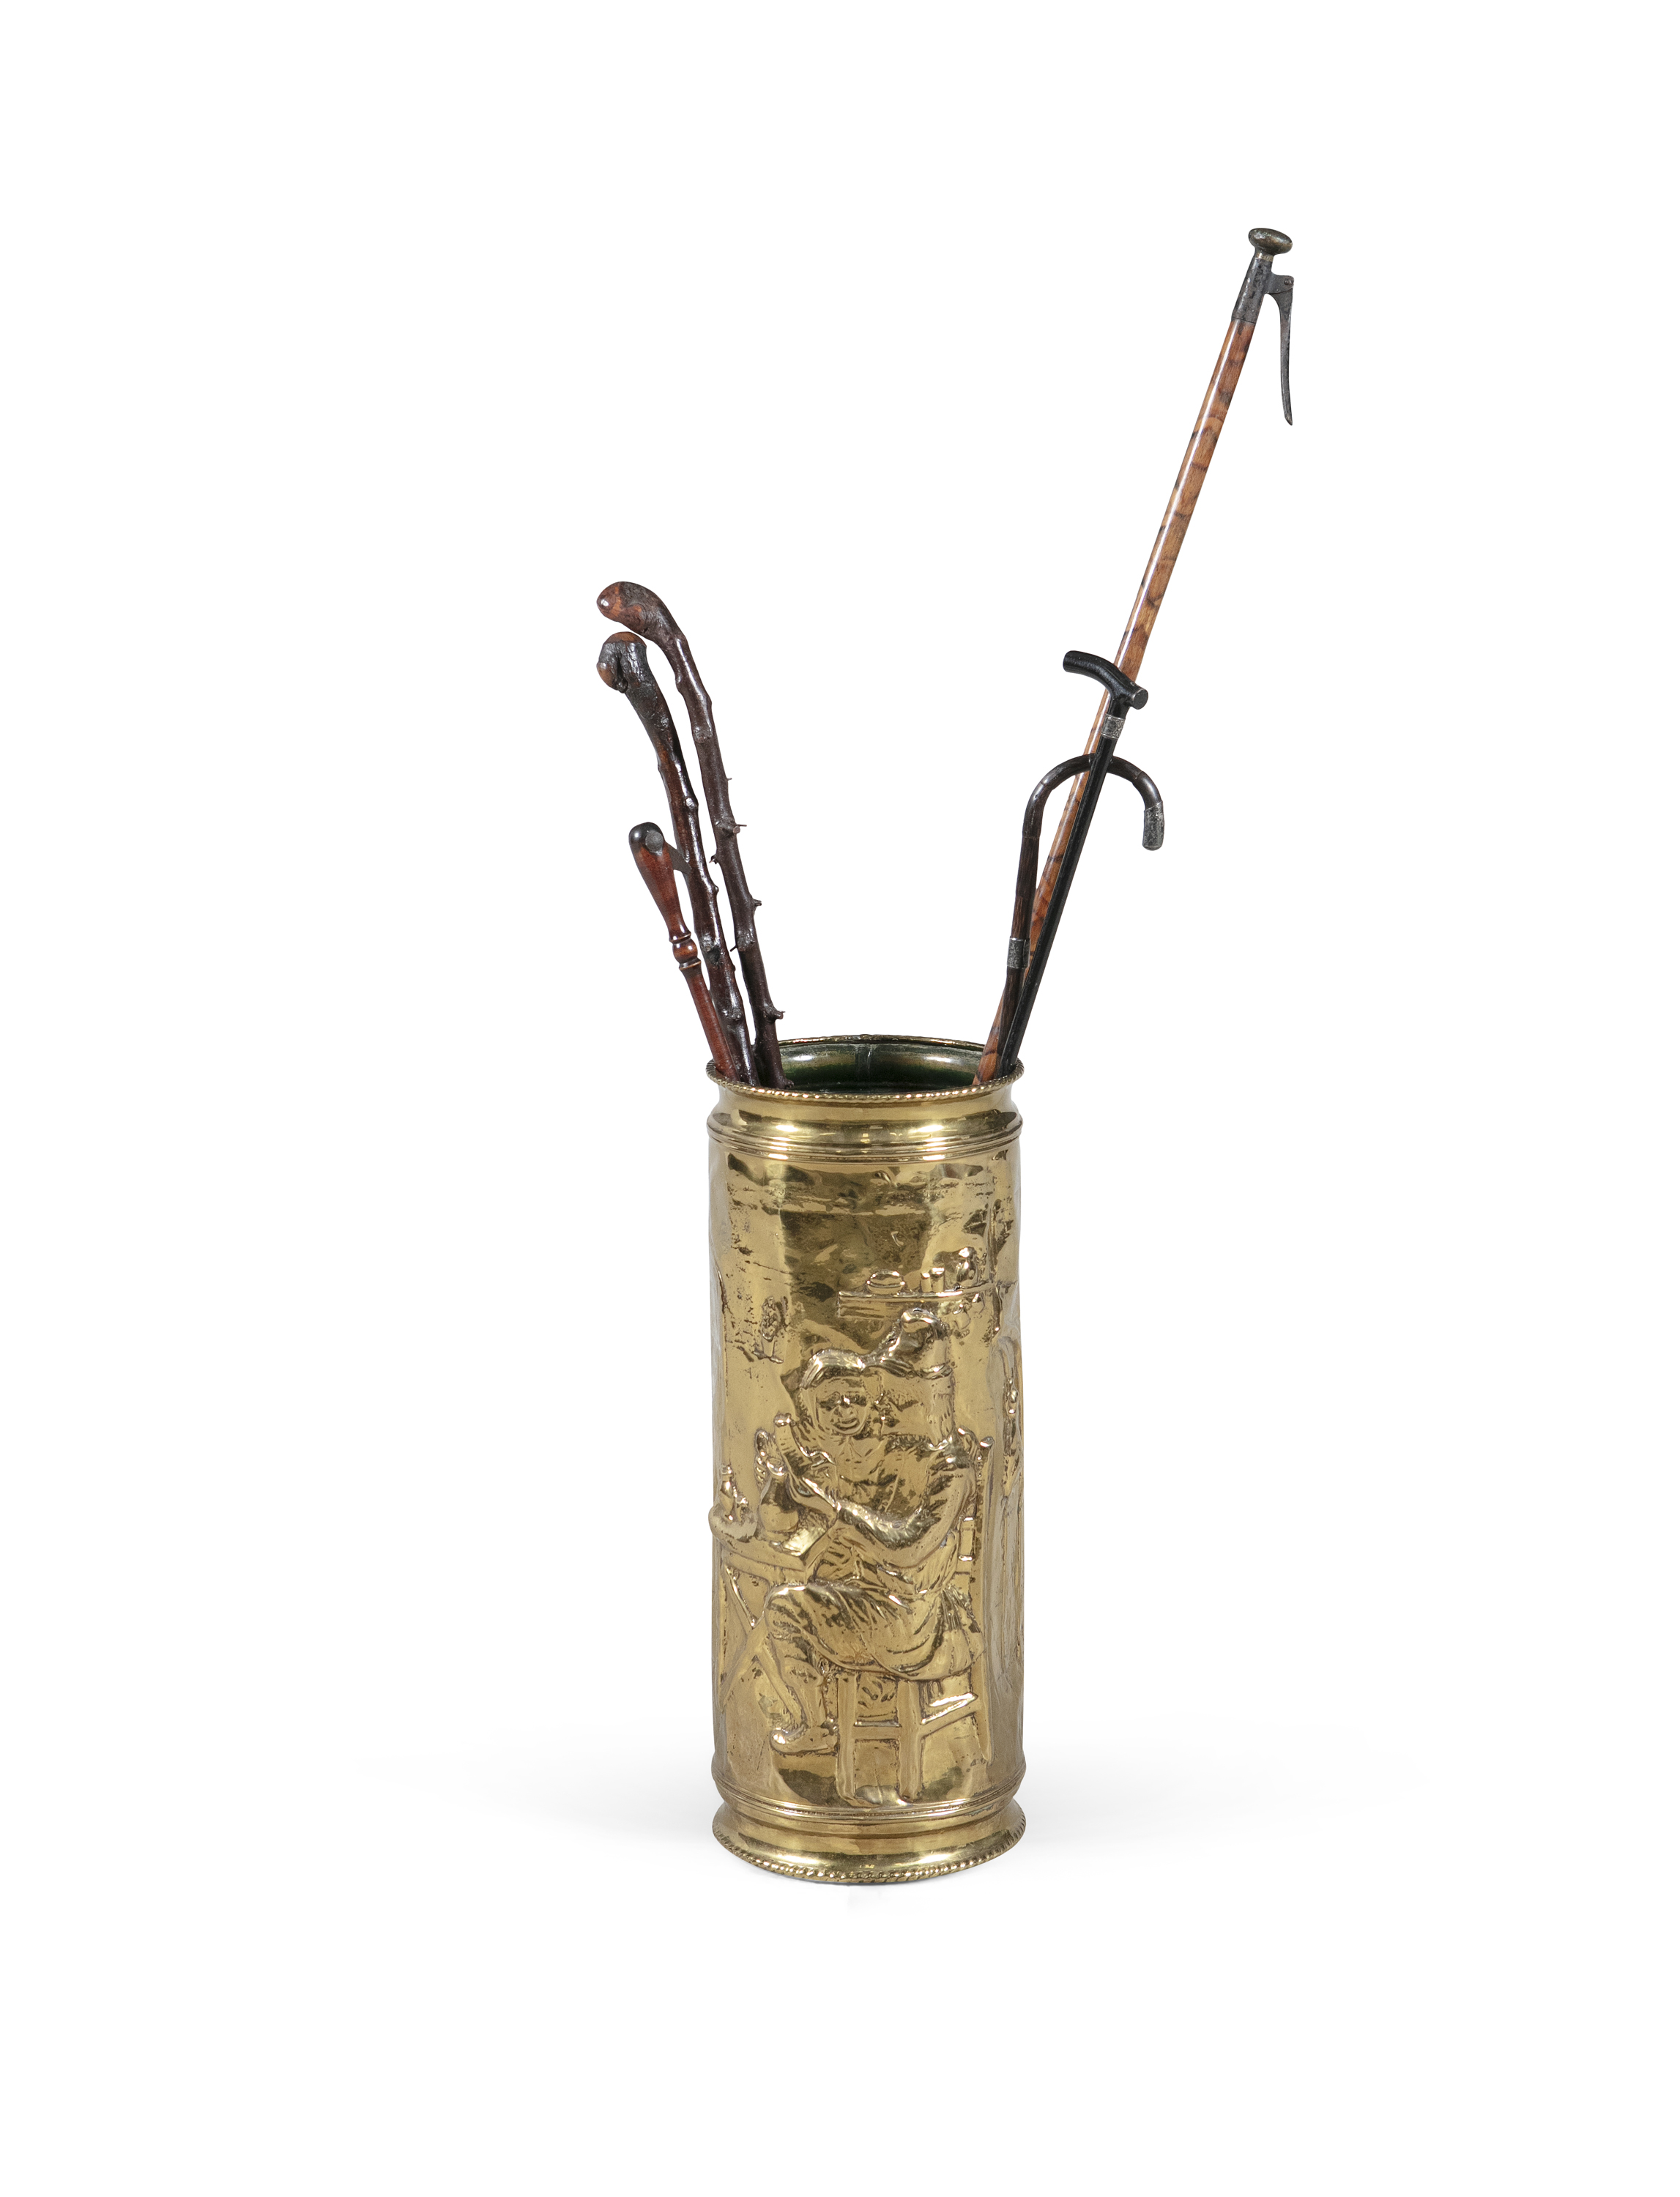 A BRASS CYLINDRICAL STICK STAND, with embossed figural decoration, in the manner of David Teniers. - Image 2 of 3